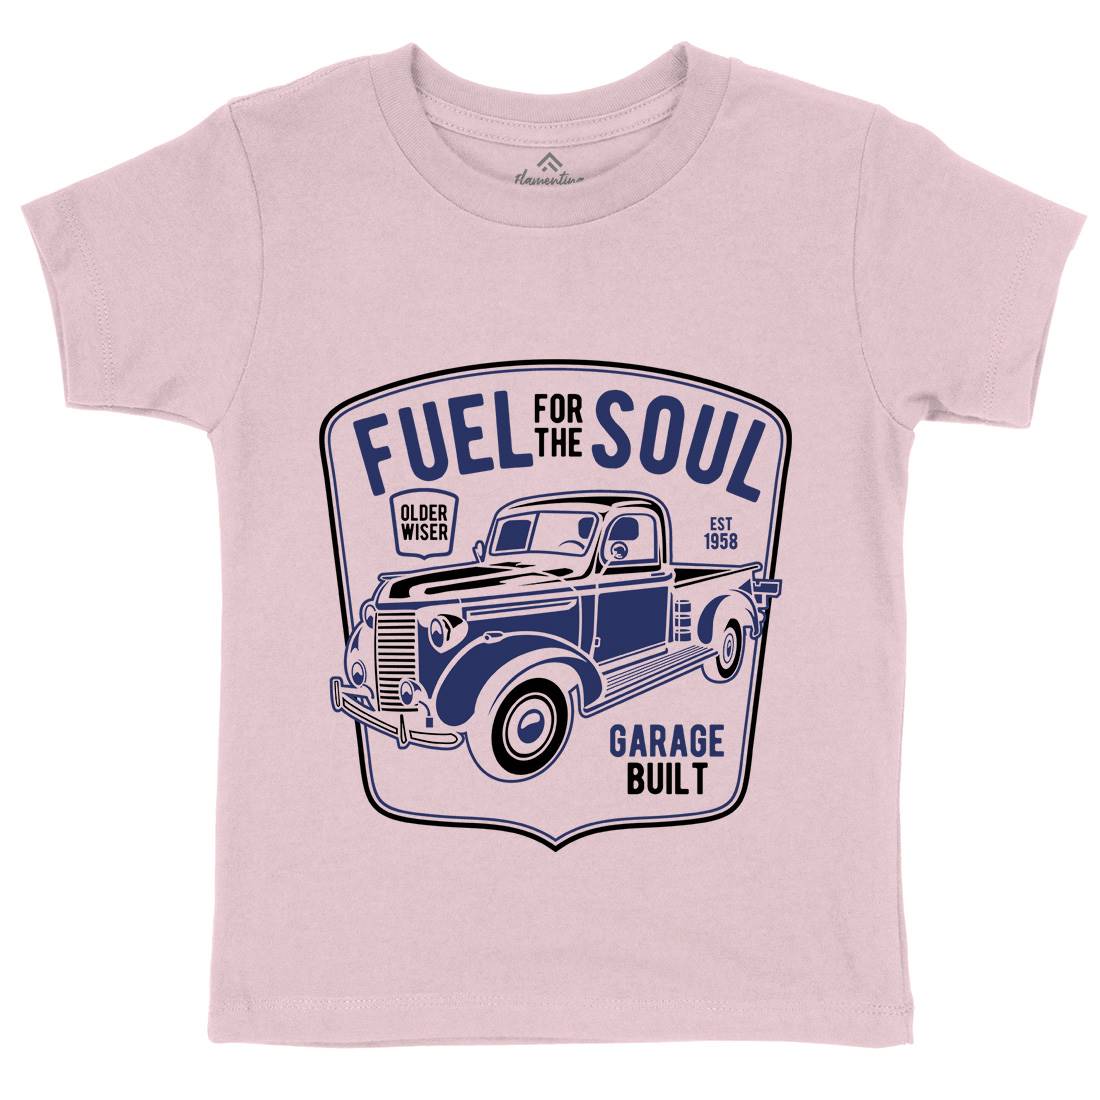 Fuel For The Soul Kids Crew Neck T-Shirt Cars B213